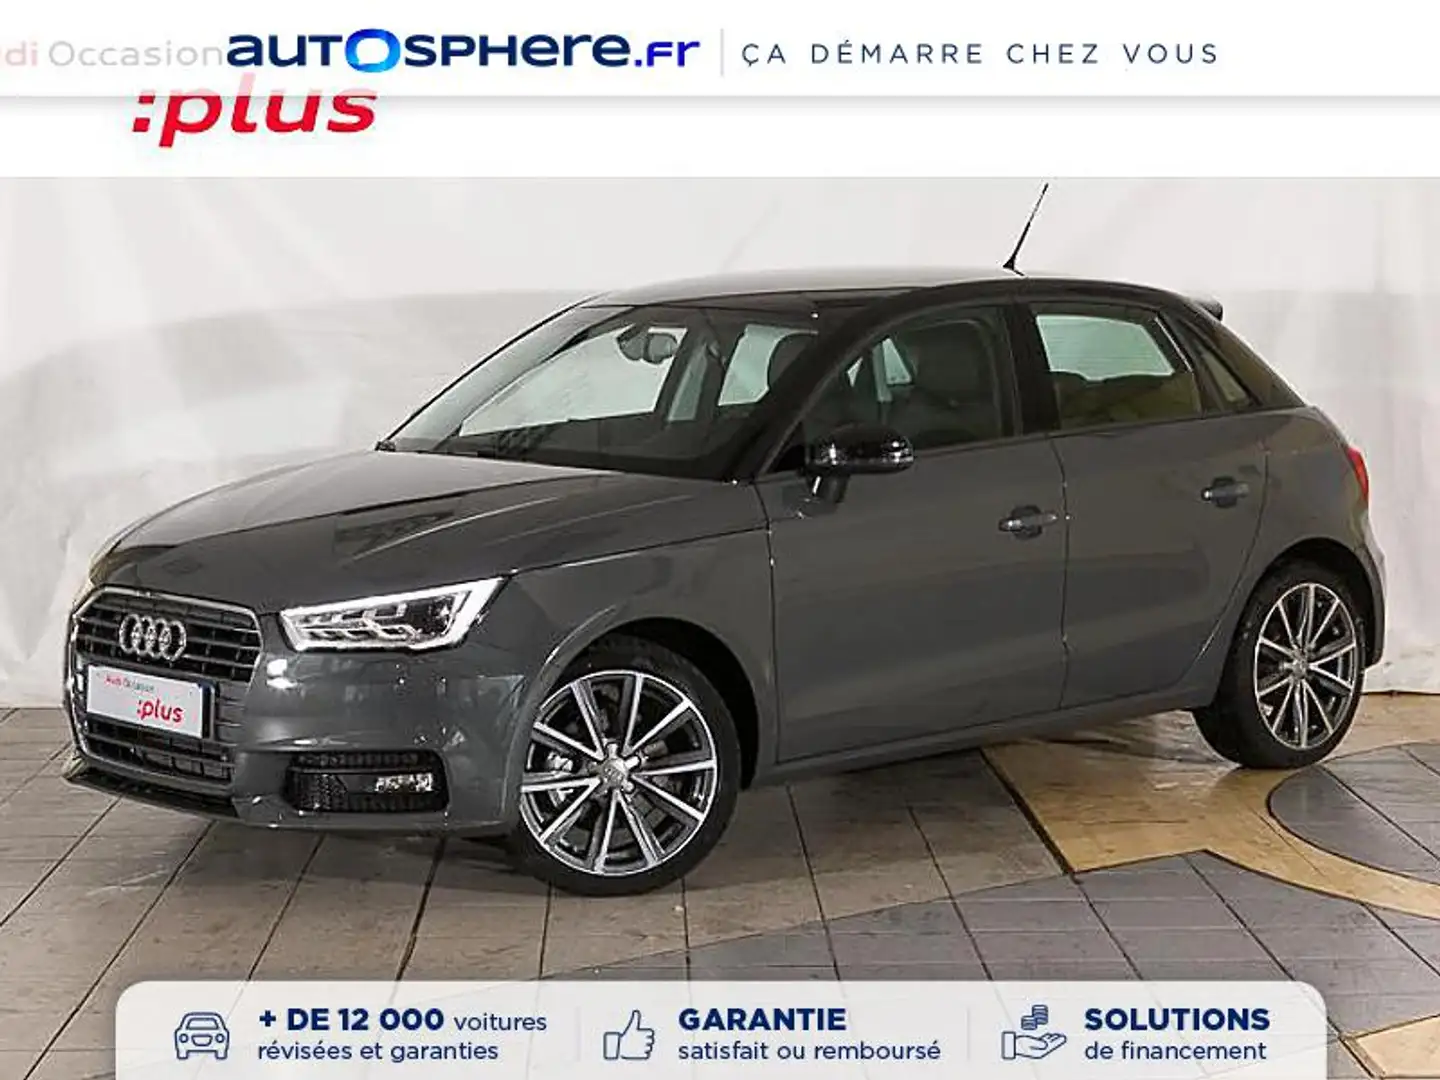 Audi A1 SPORTBACK 1.6 TDI 116ch Ambition Luxe S tronic 7 - 1